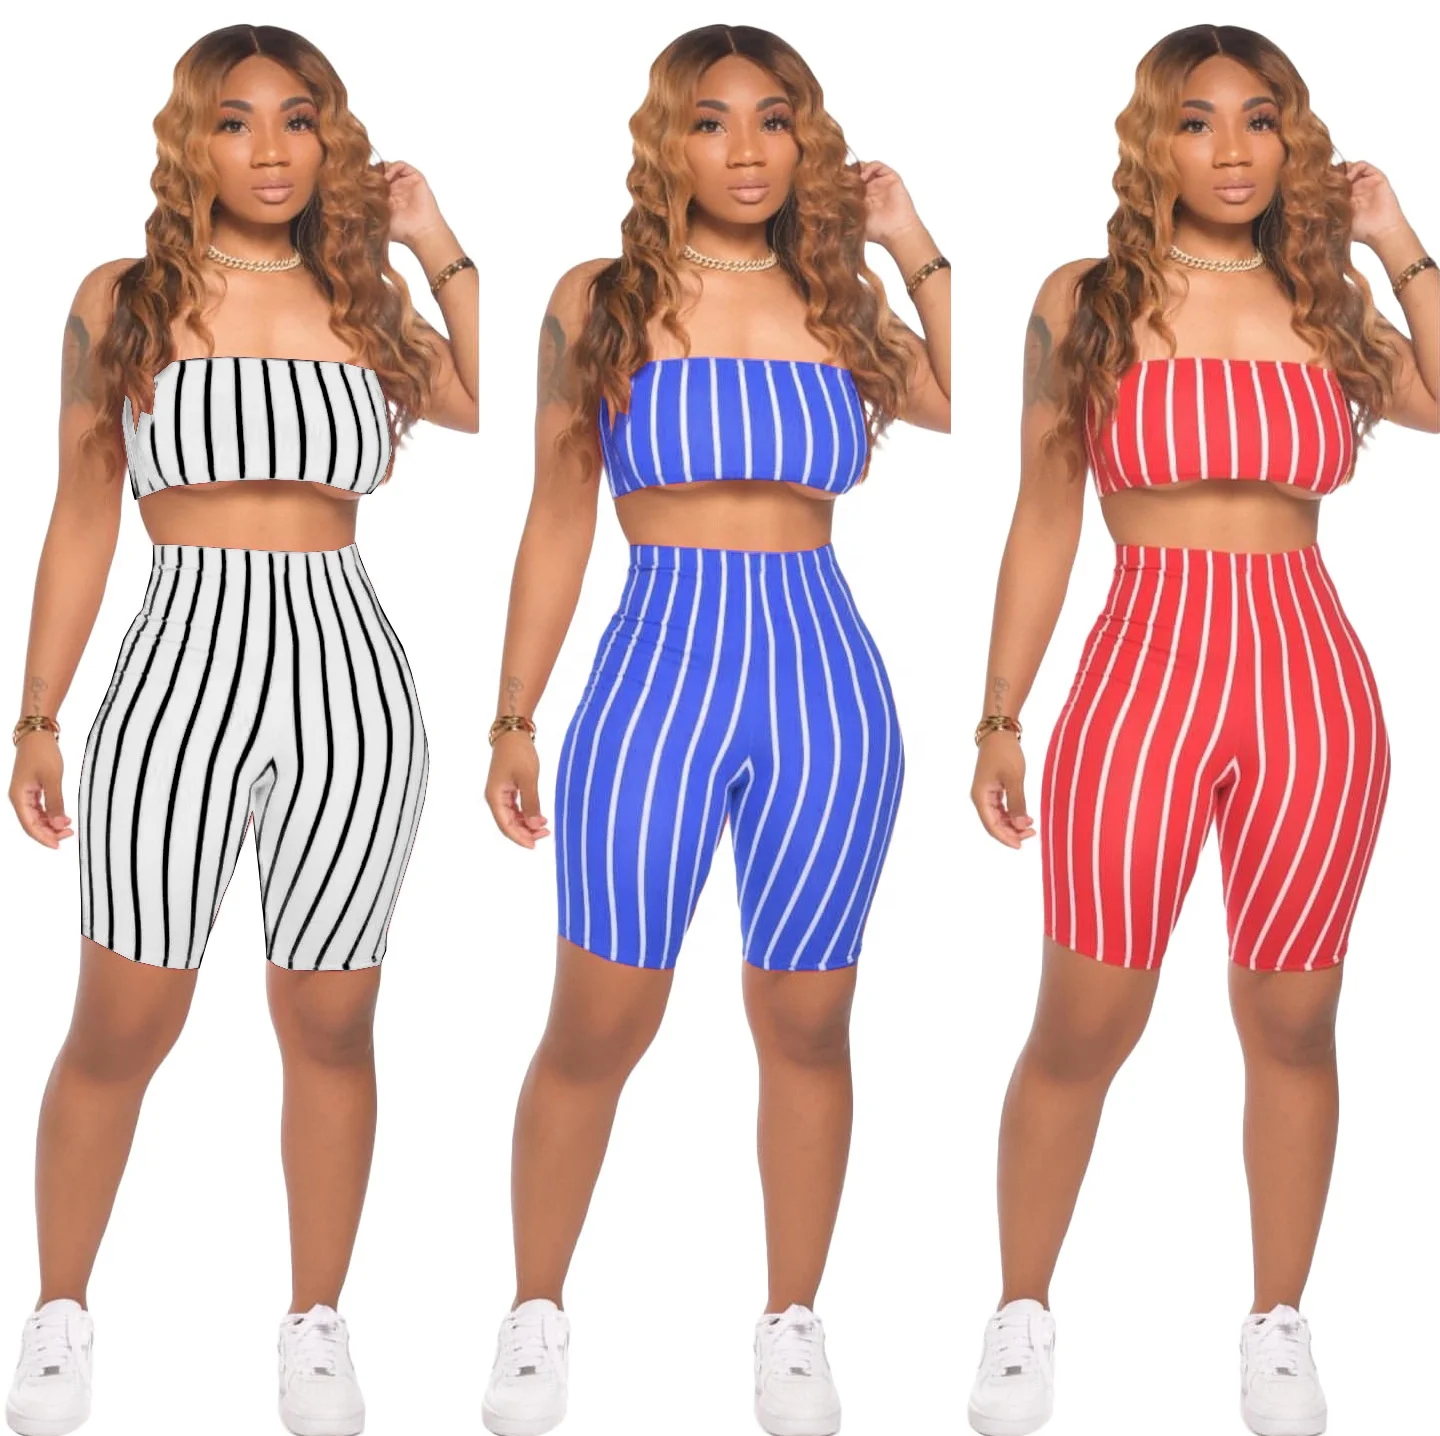 

MT117-603 2021 hot sale fashion women's sexy wrap chst striped casual sports women's two-piece suit women clothing sets